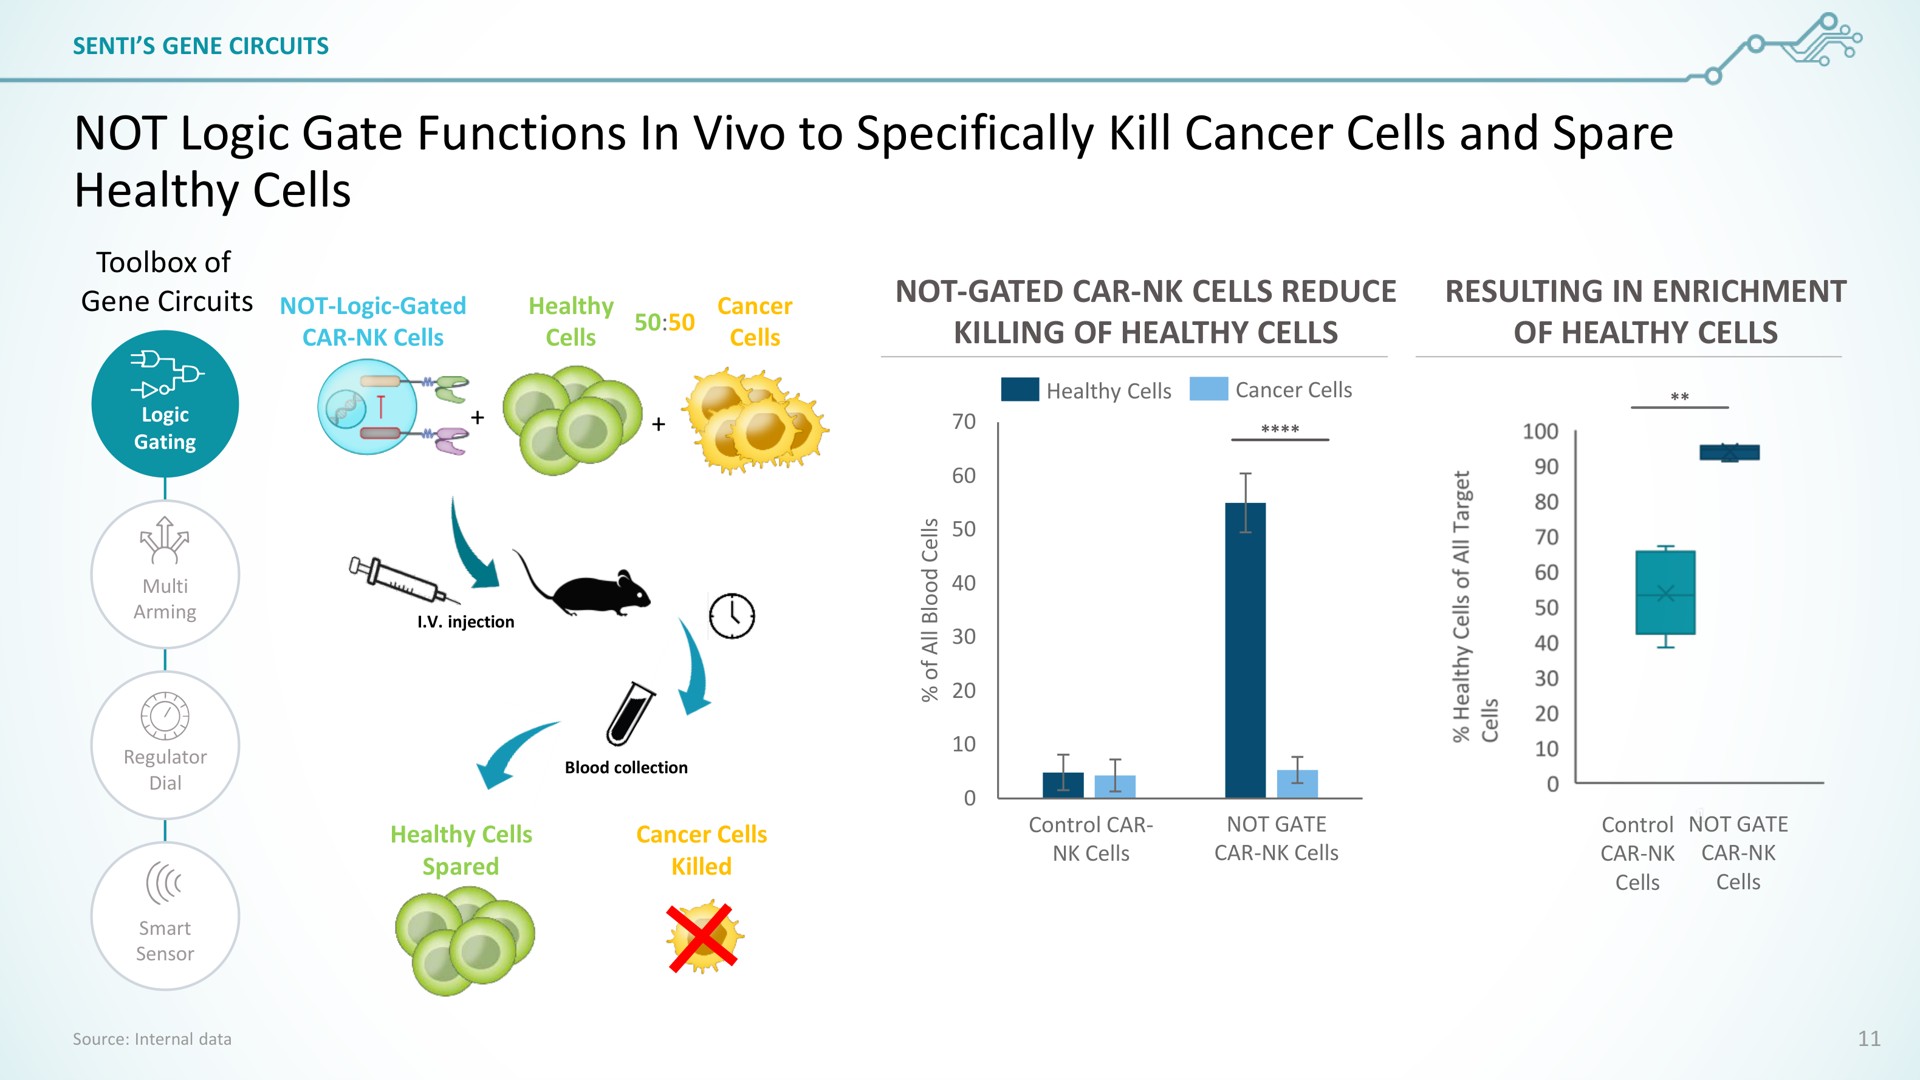 not logic gate functions in to specifically kill cancer cells and spare healthy cells a sie | SentiBio